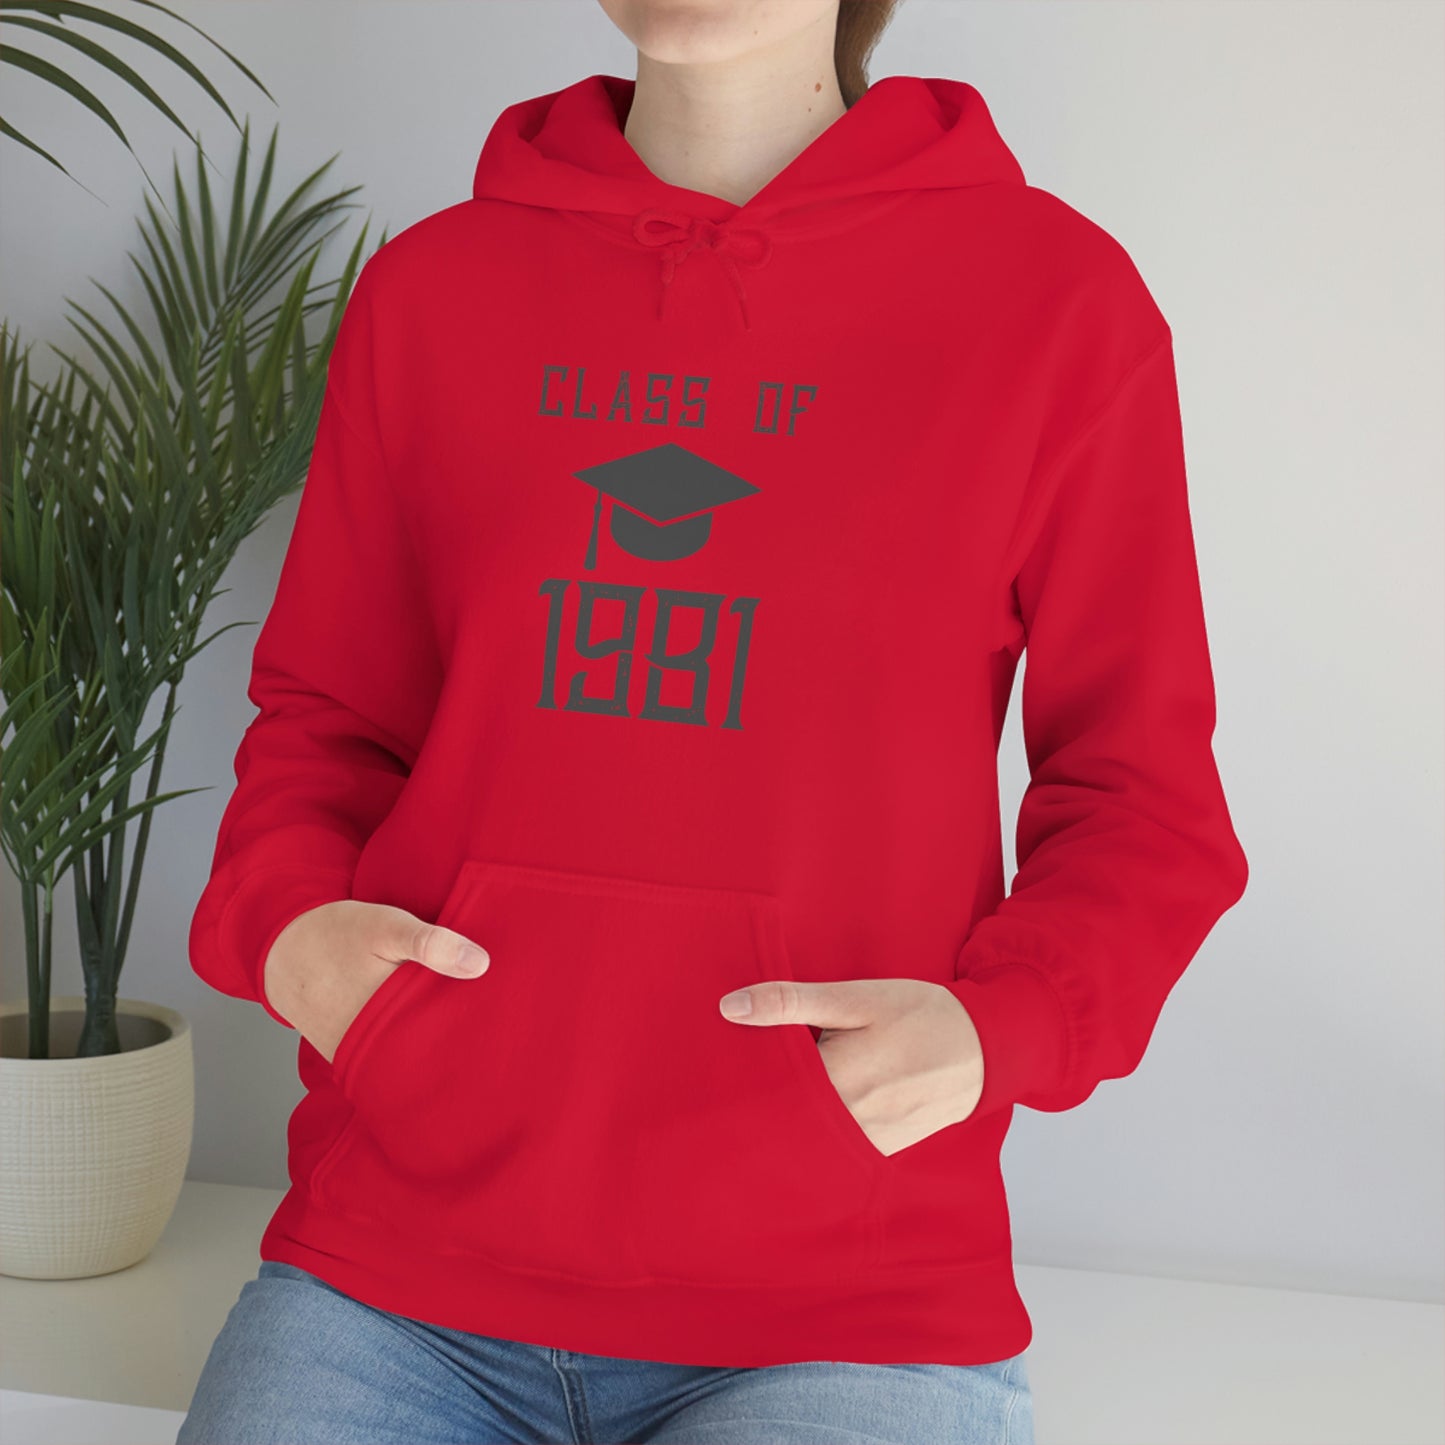 "Class Of 1981" Hoodie - Weave Got Gifts - Unique Gifts You Won’t Find Anywhere Else!